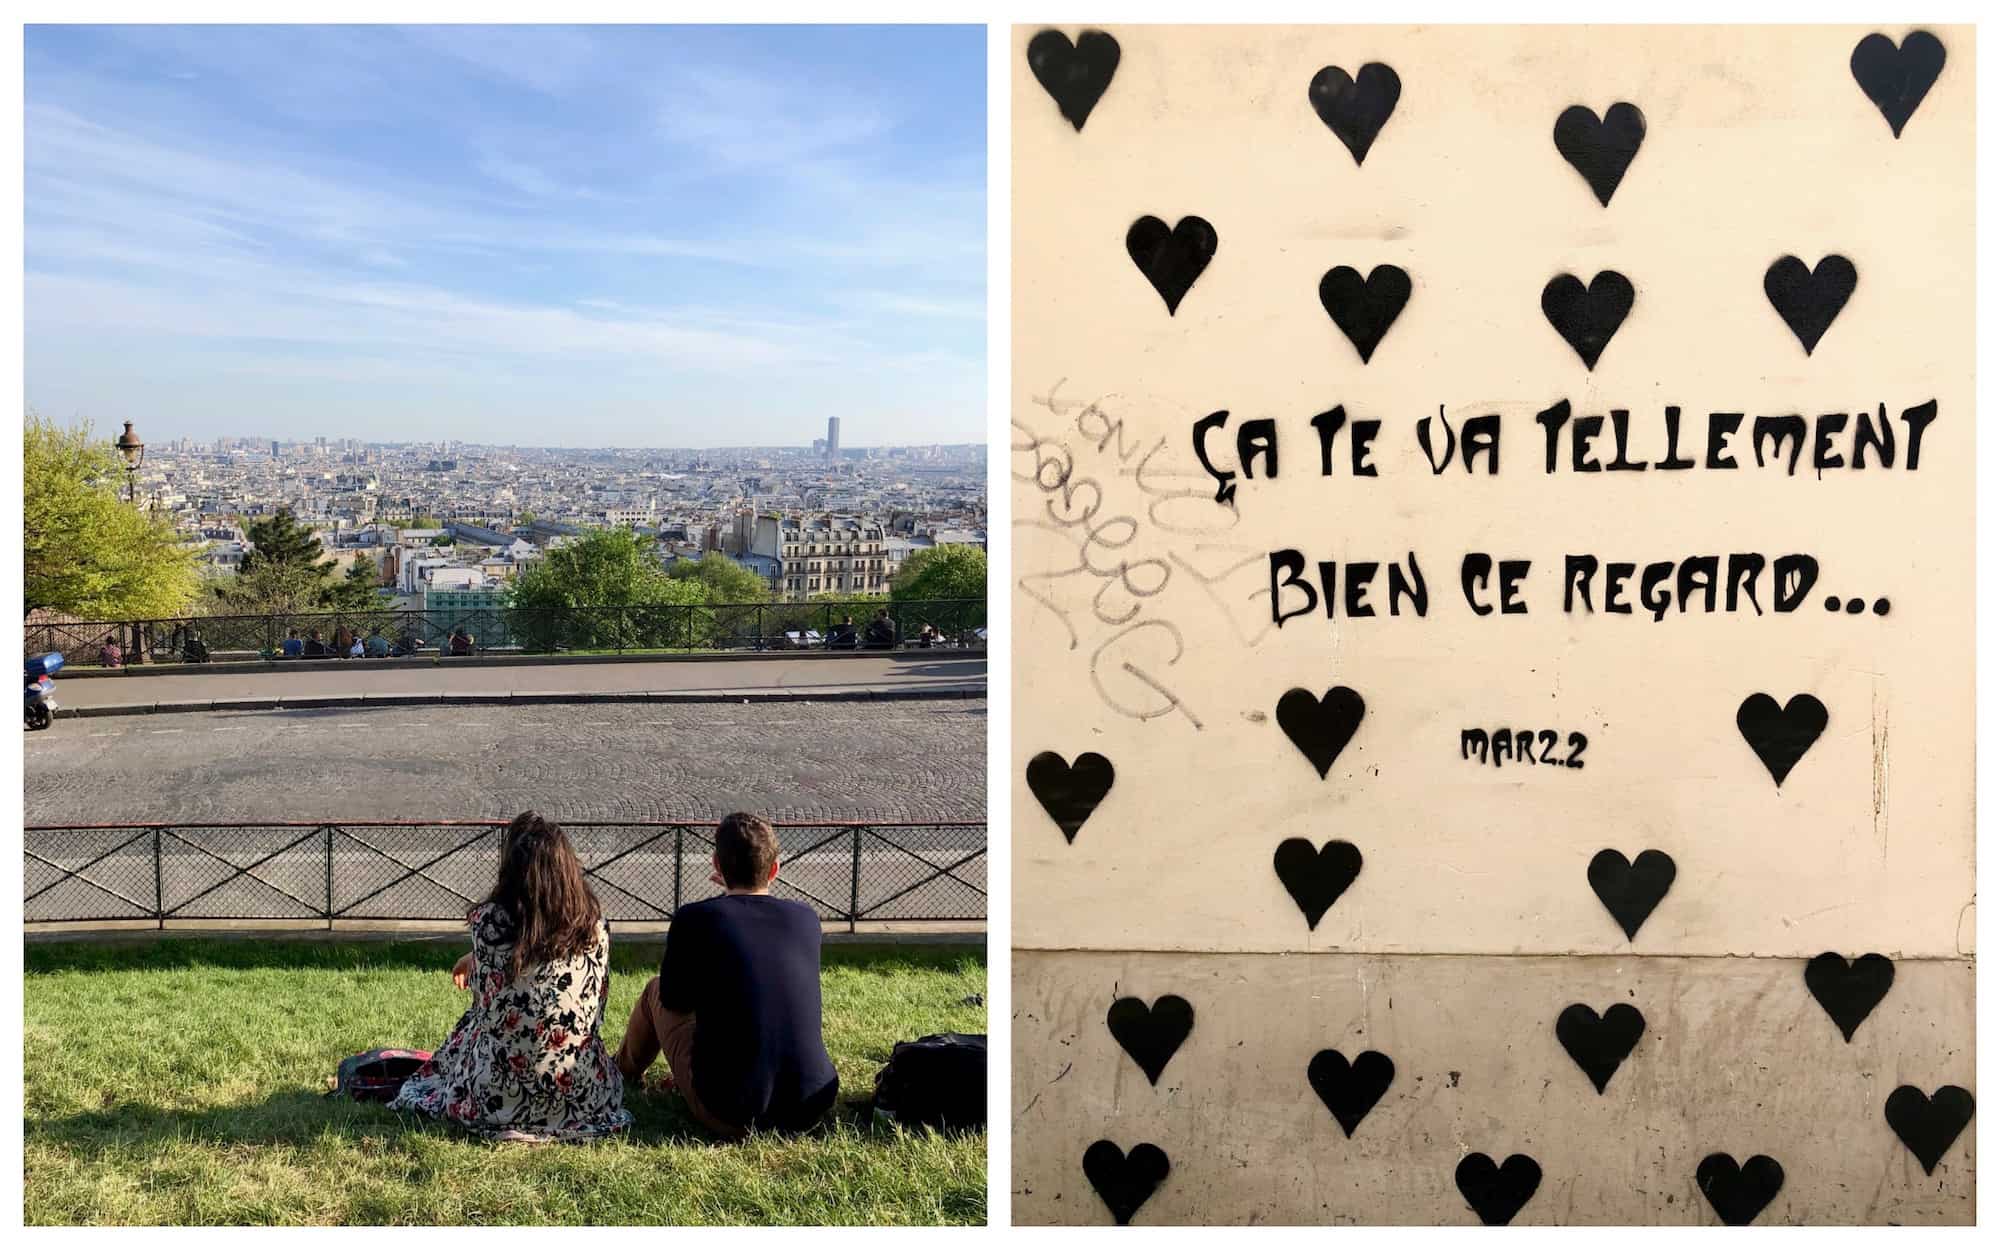 Learning French in Paris is easiest when you make friends so you can practise, like this young woman and man looking out at the views of the Paris rooftops in Montmartre (left). It also means you can understand the street art in Paris like this piece: that look in your eyes suits you so well.